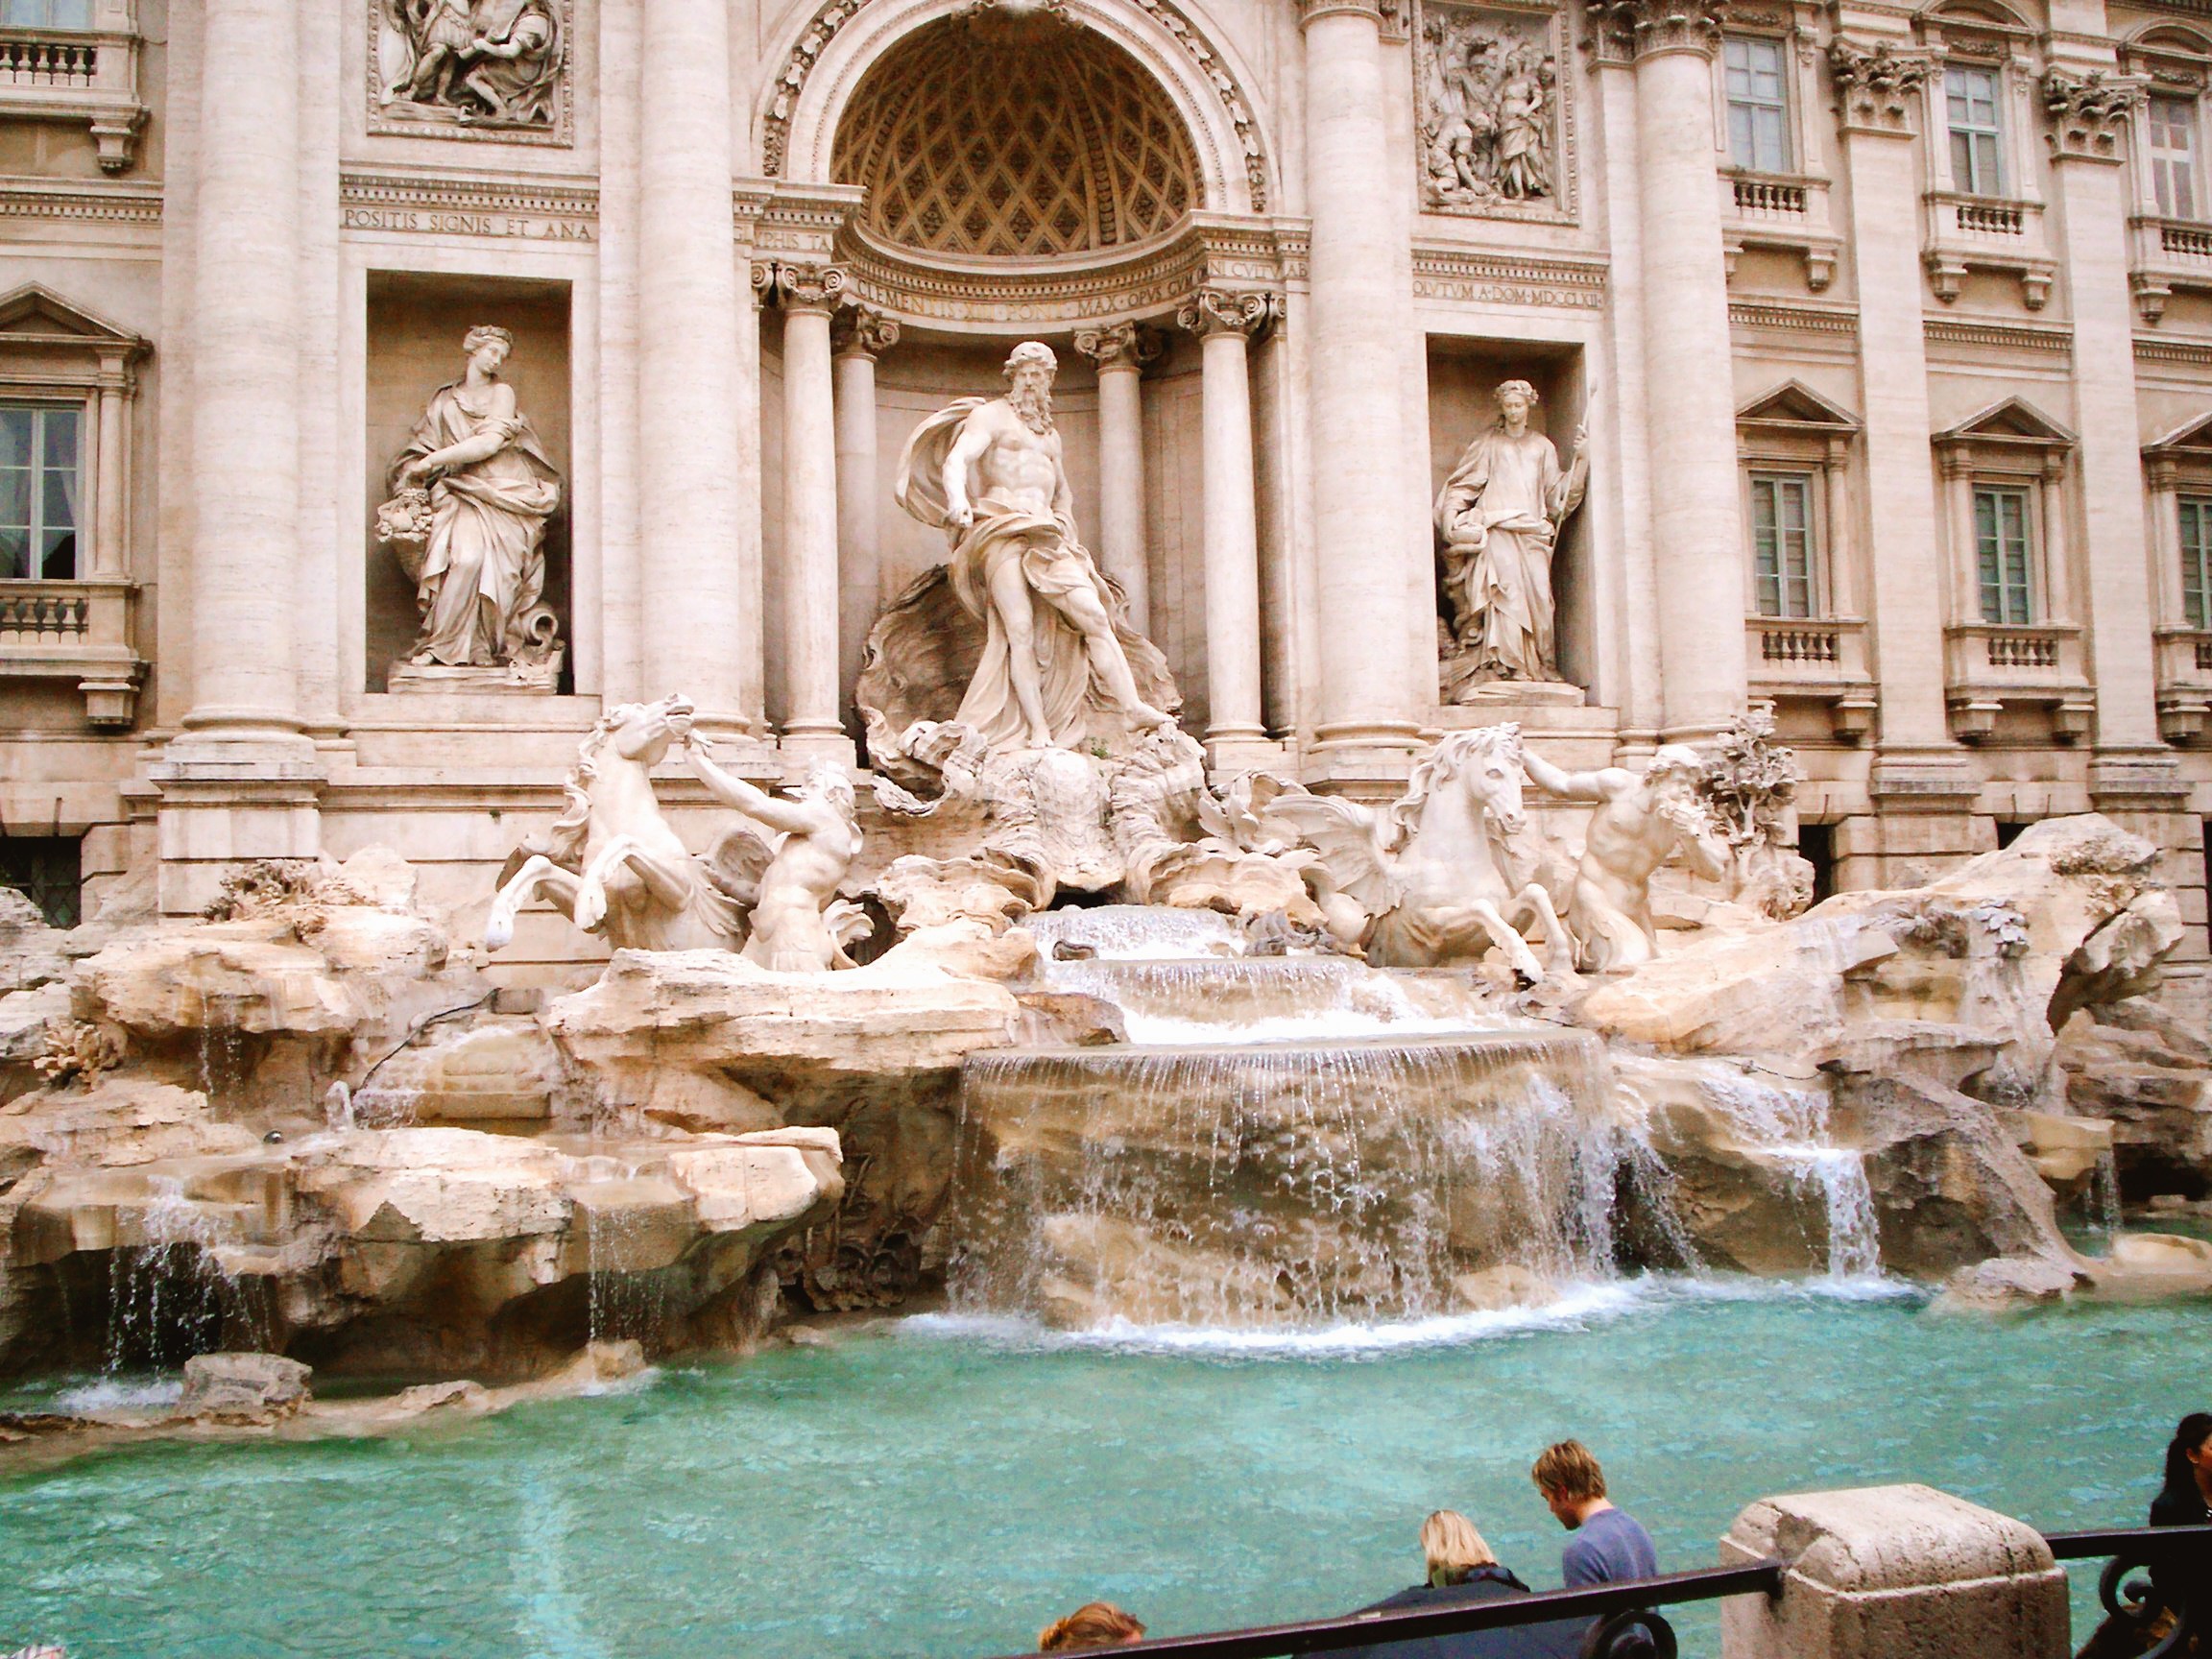 View of the Trevi Fountain from the street level at the top of the stairs with turquoise waters in Rome Italy